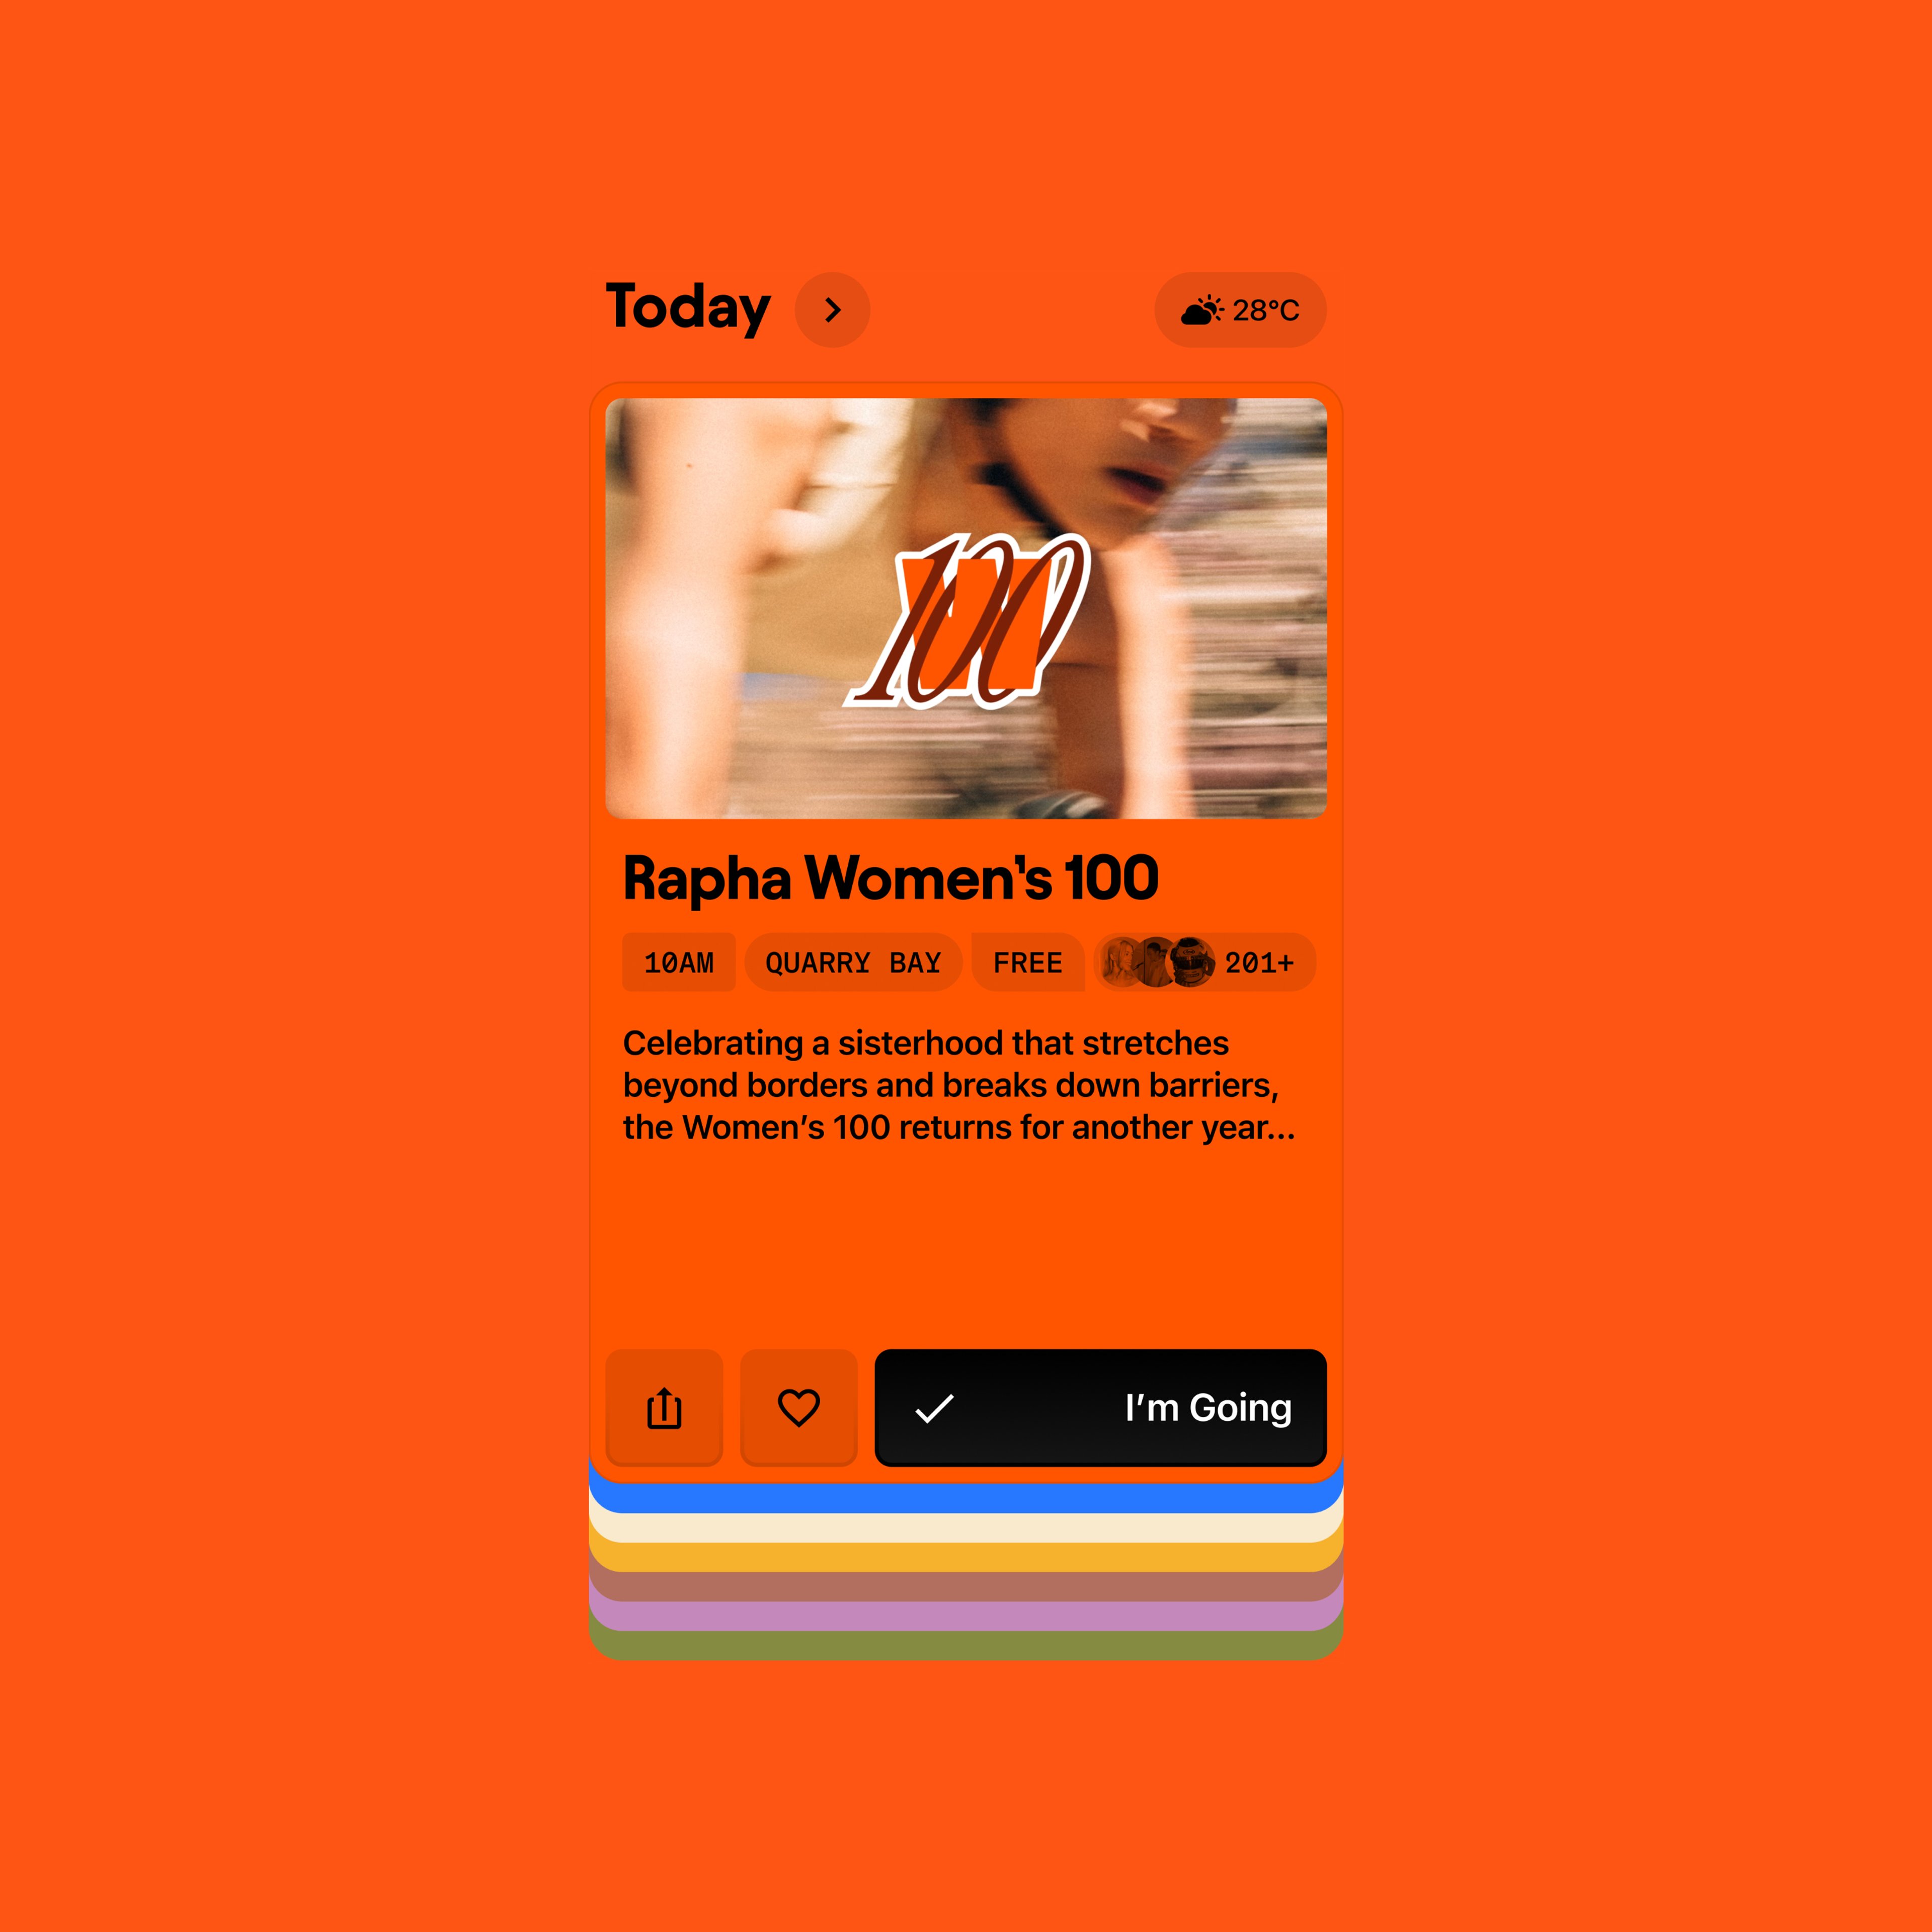 Main homepage module from the Today app showing the latest event "Rapha Women's 100"